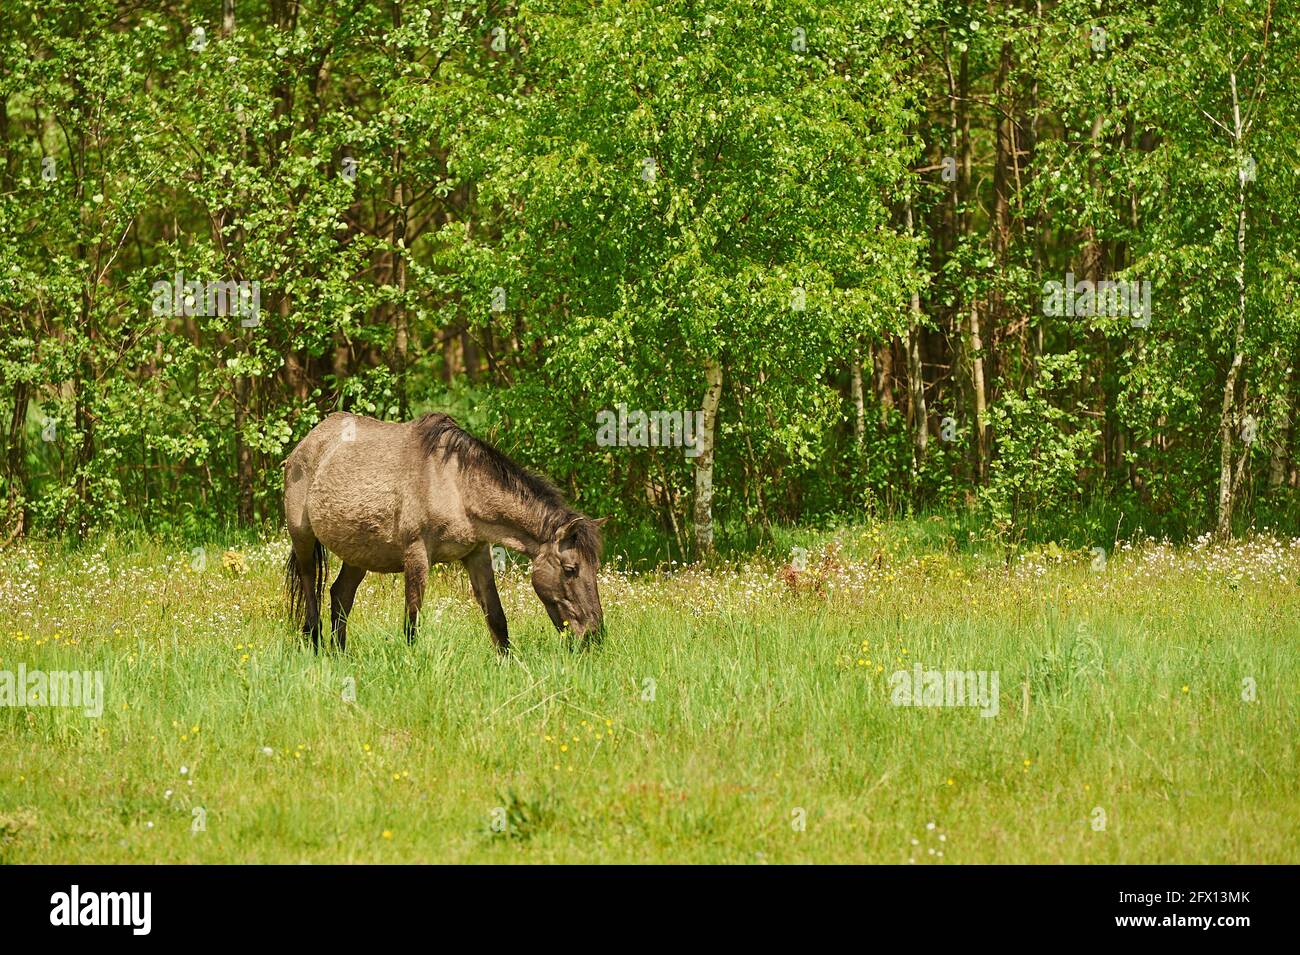 Polish Konik - a horse grazing in a meadow on a sunny day Stock Photo